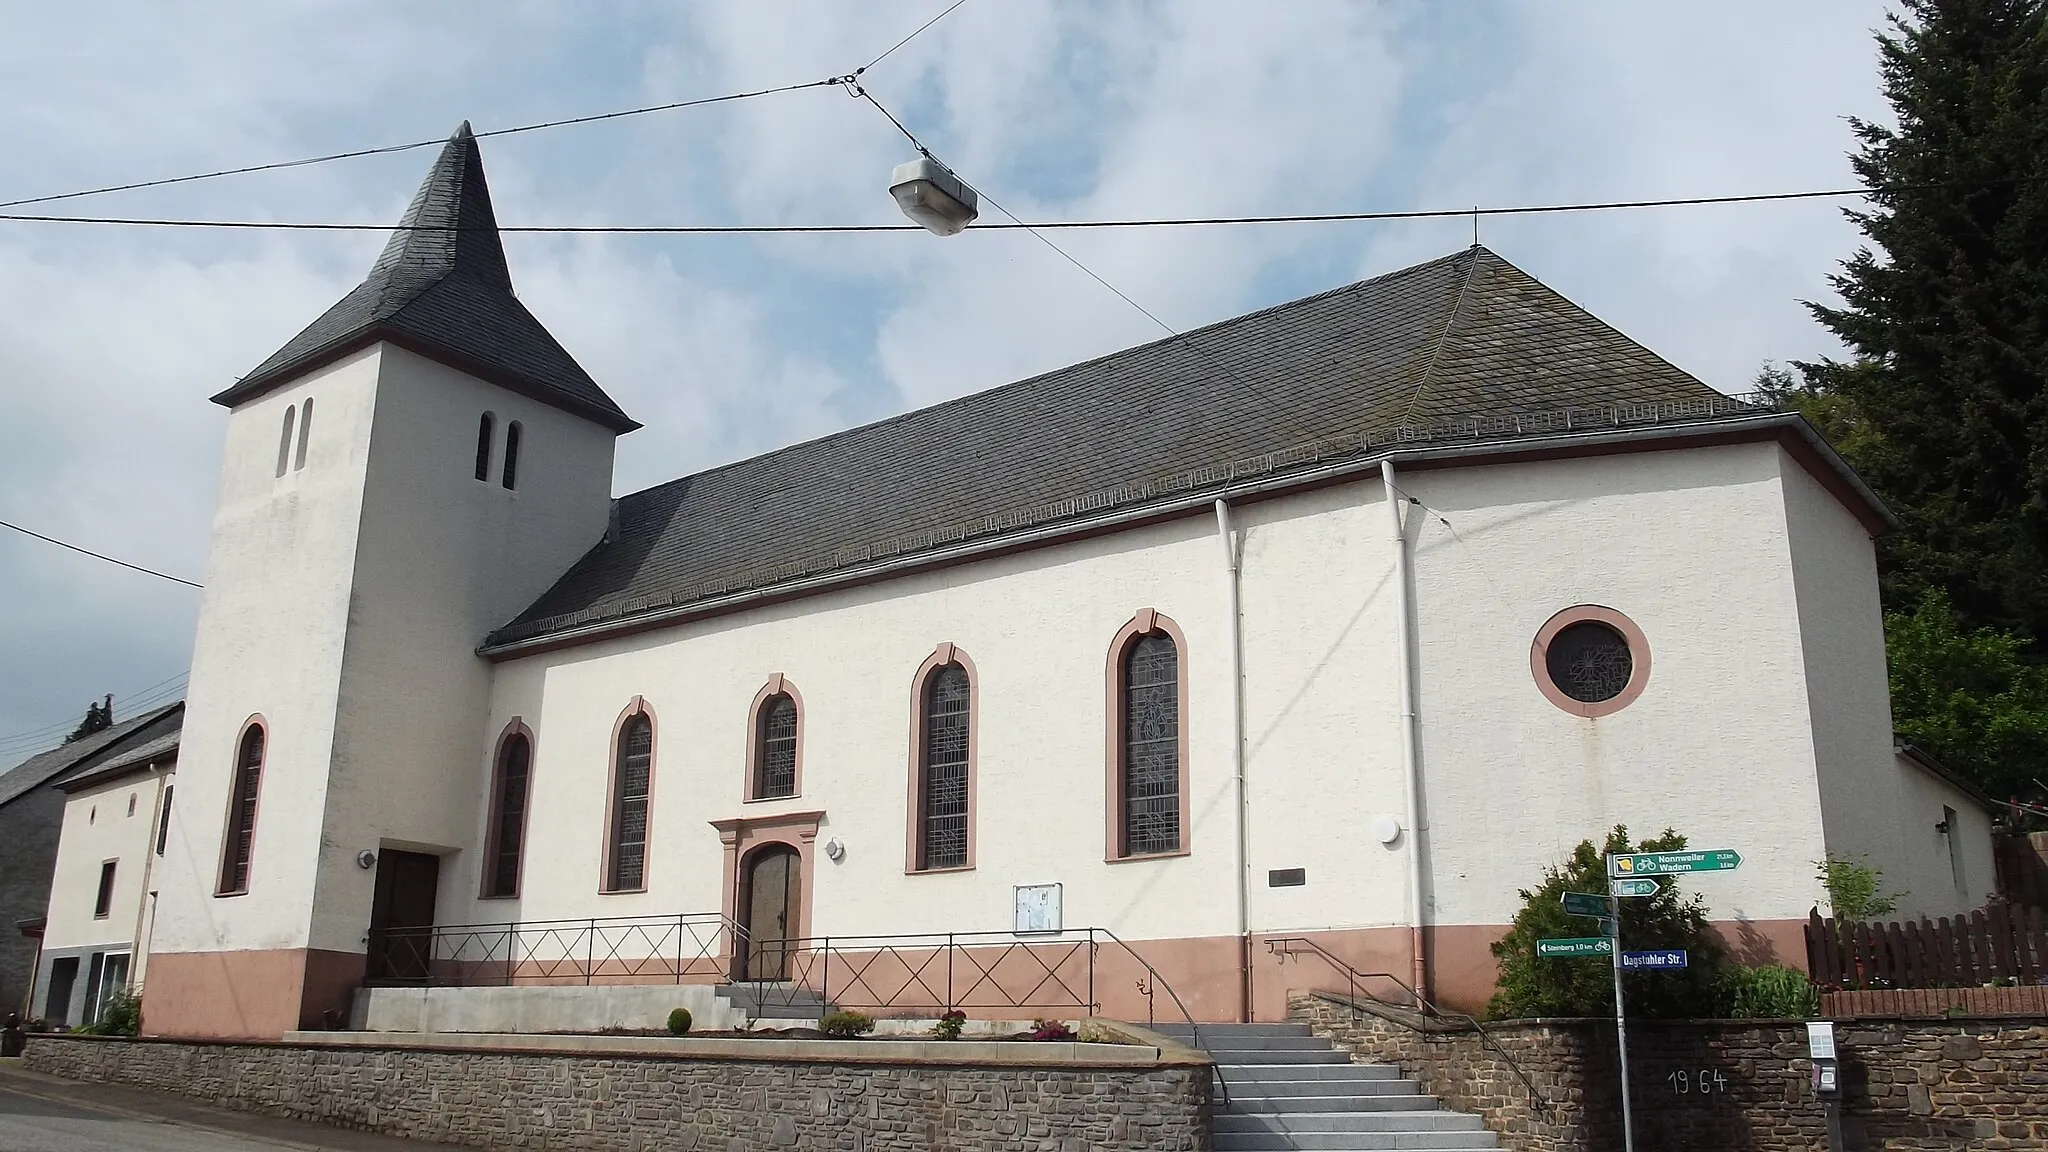 Photo showing: Exterior of the roman catholic church in Morscholz, Saarland